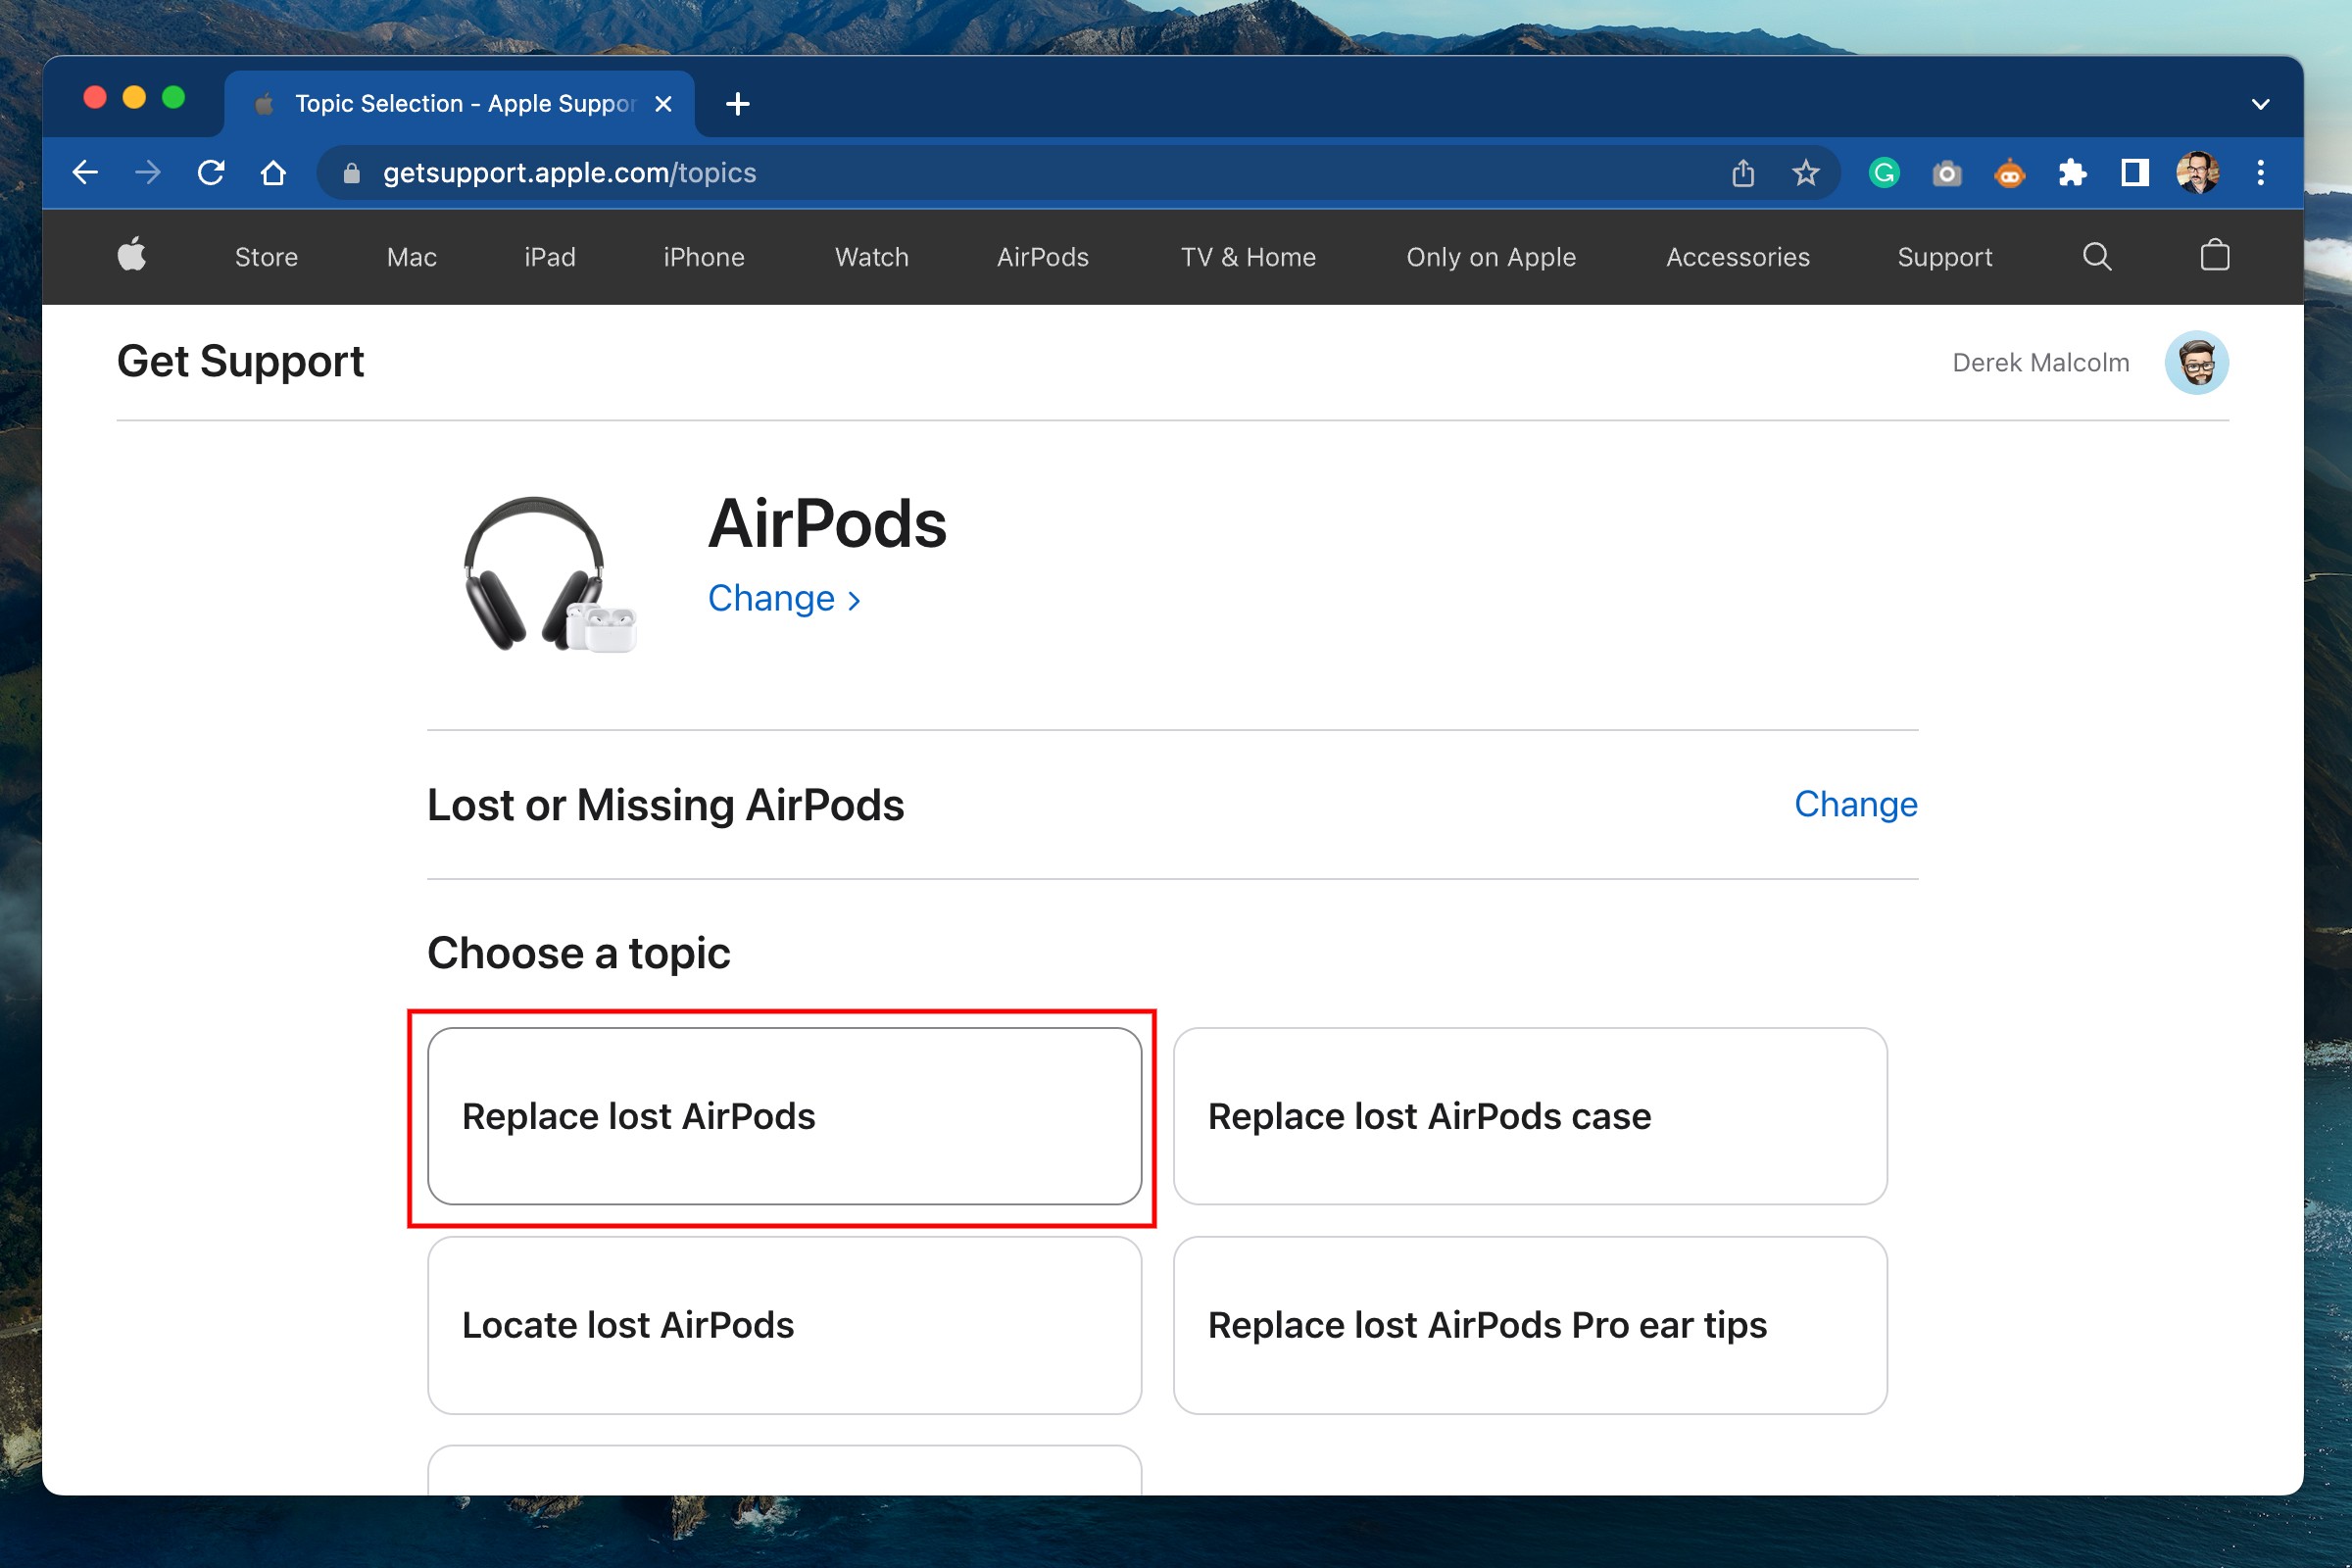 Steps for how to replace lost or missing AirPods.